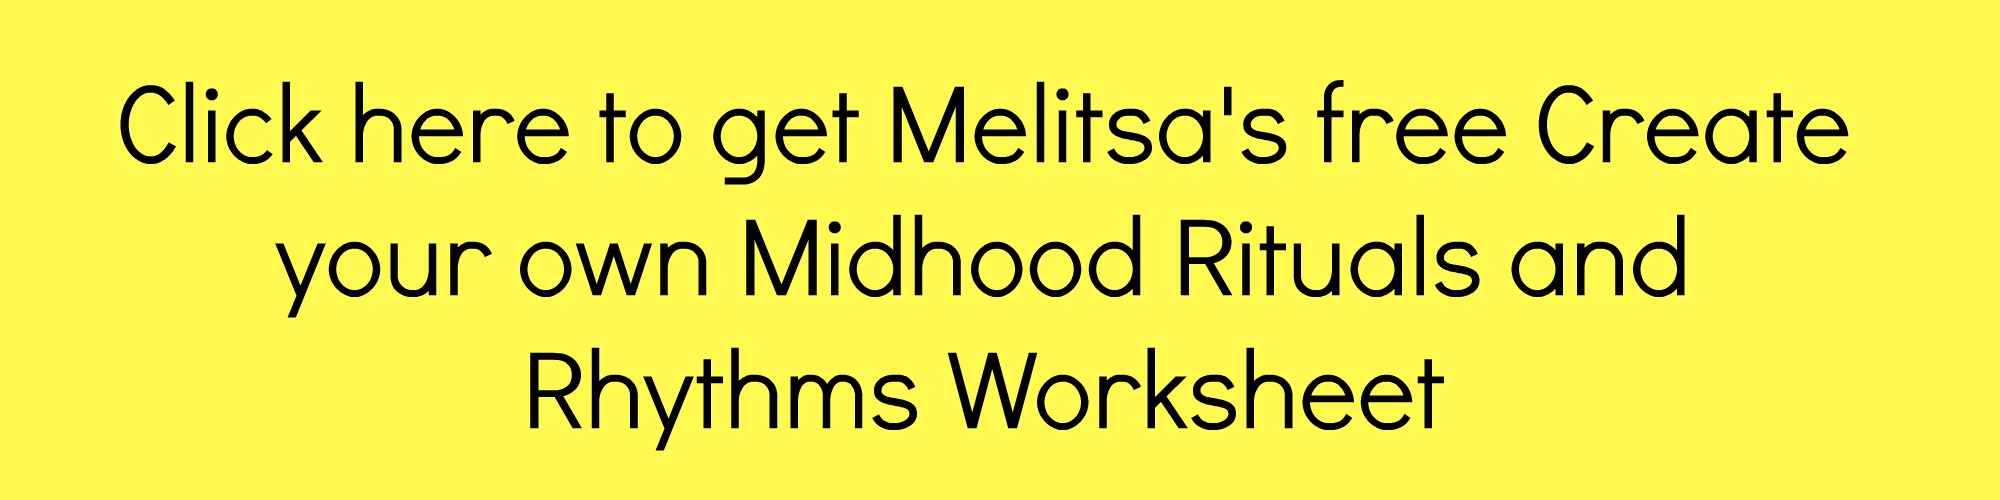 Click here to get Melitsa's free Create your own Midhood Rituals and Rhythms Worksheet